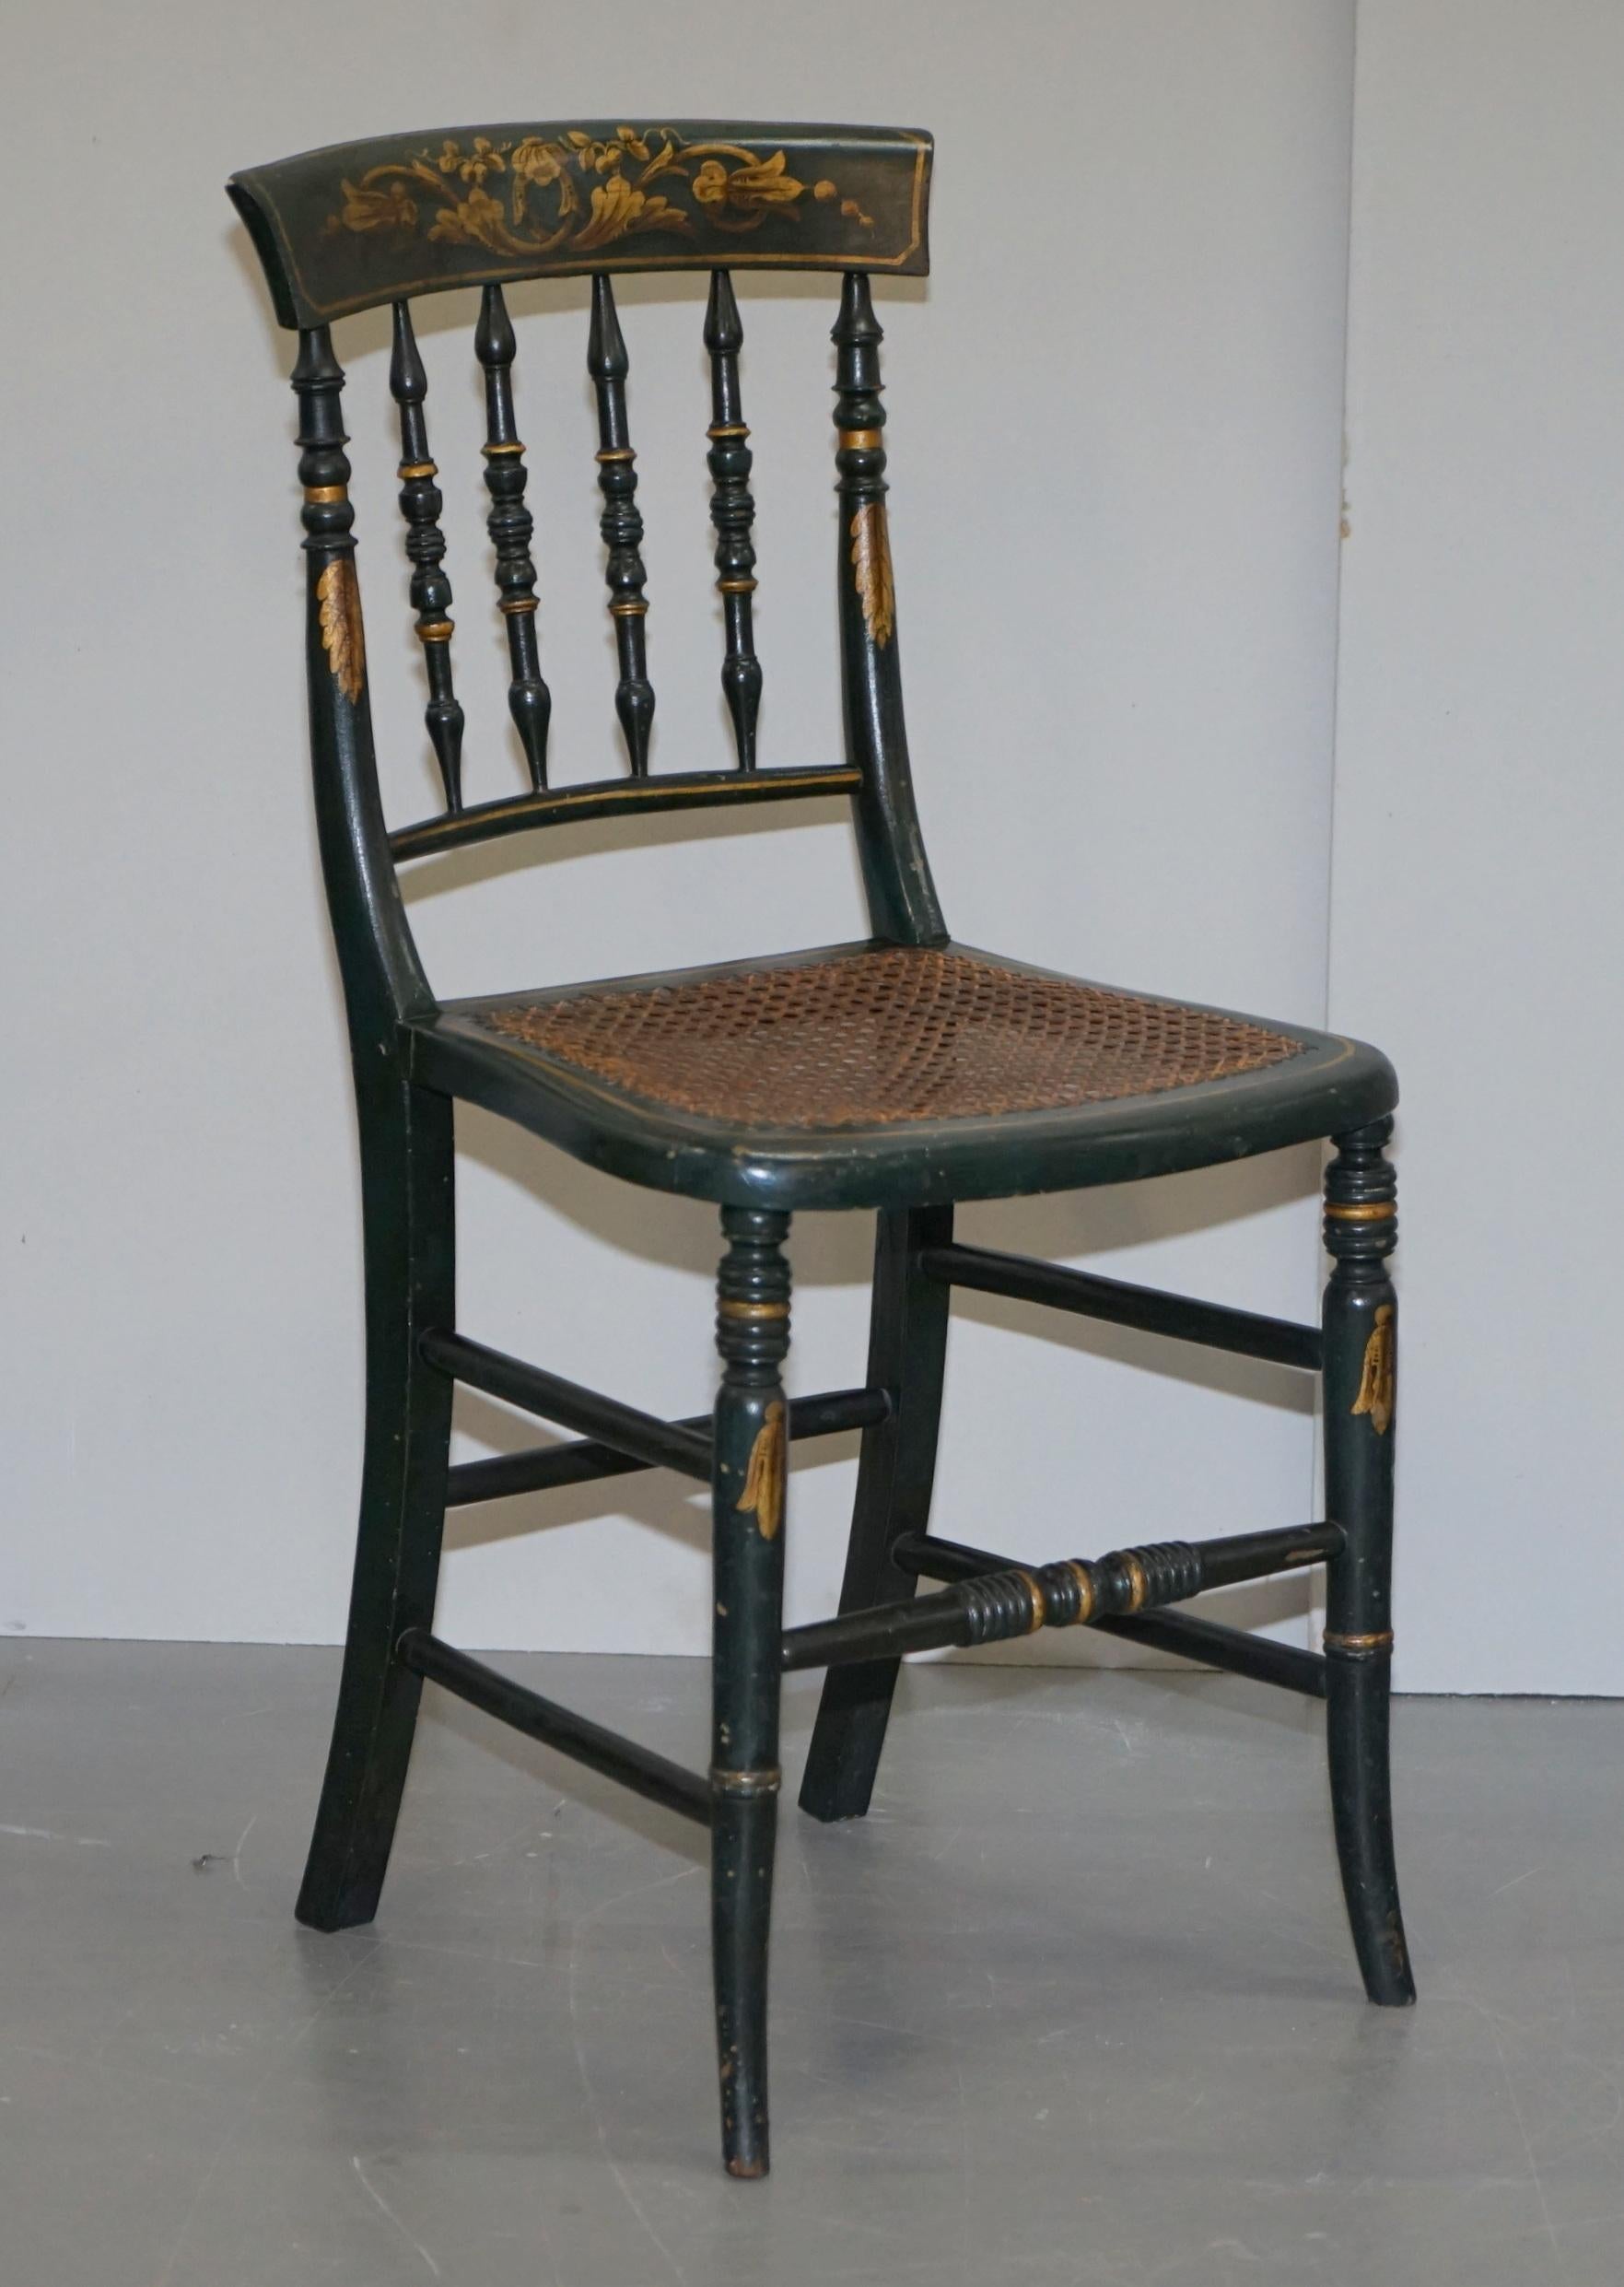 We are delighted to offer for sale this lovely original suite of four circa 1810-1820 Regency hand painted green with floral details bergere chairs

A very good looking well made and collectable suite. These were the height of fashion in the Regency